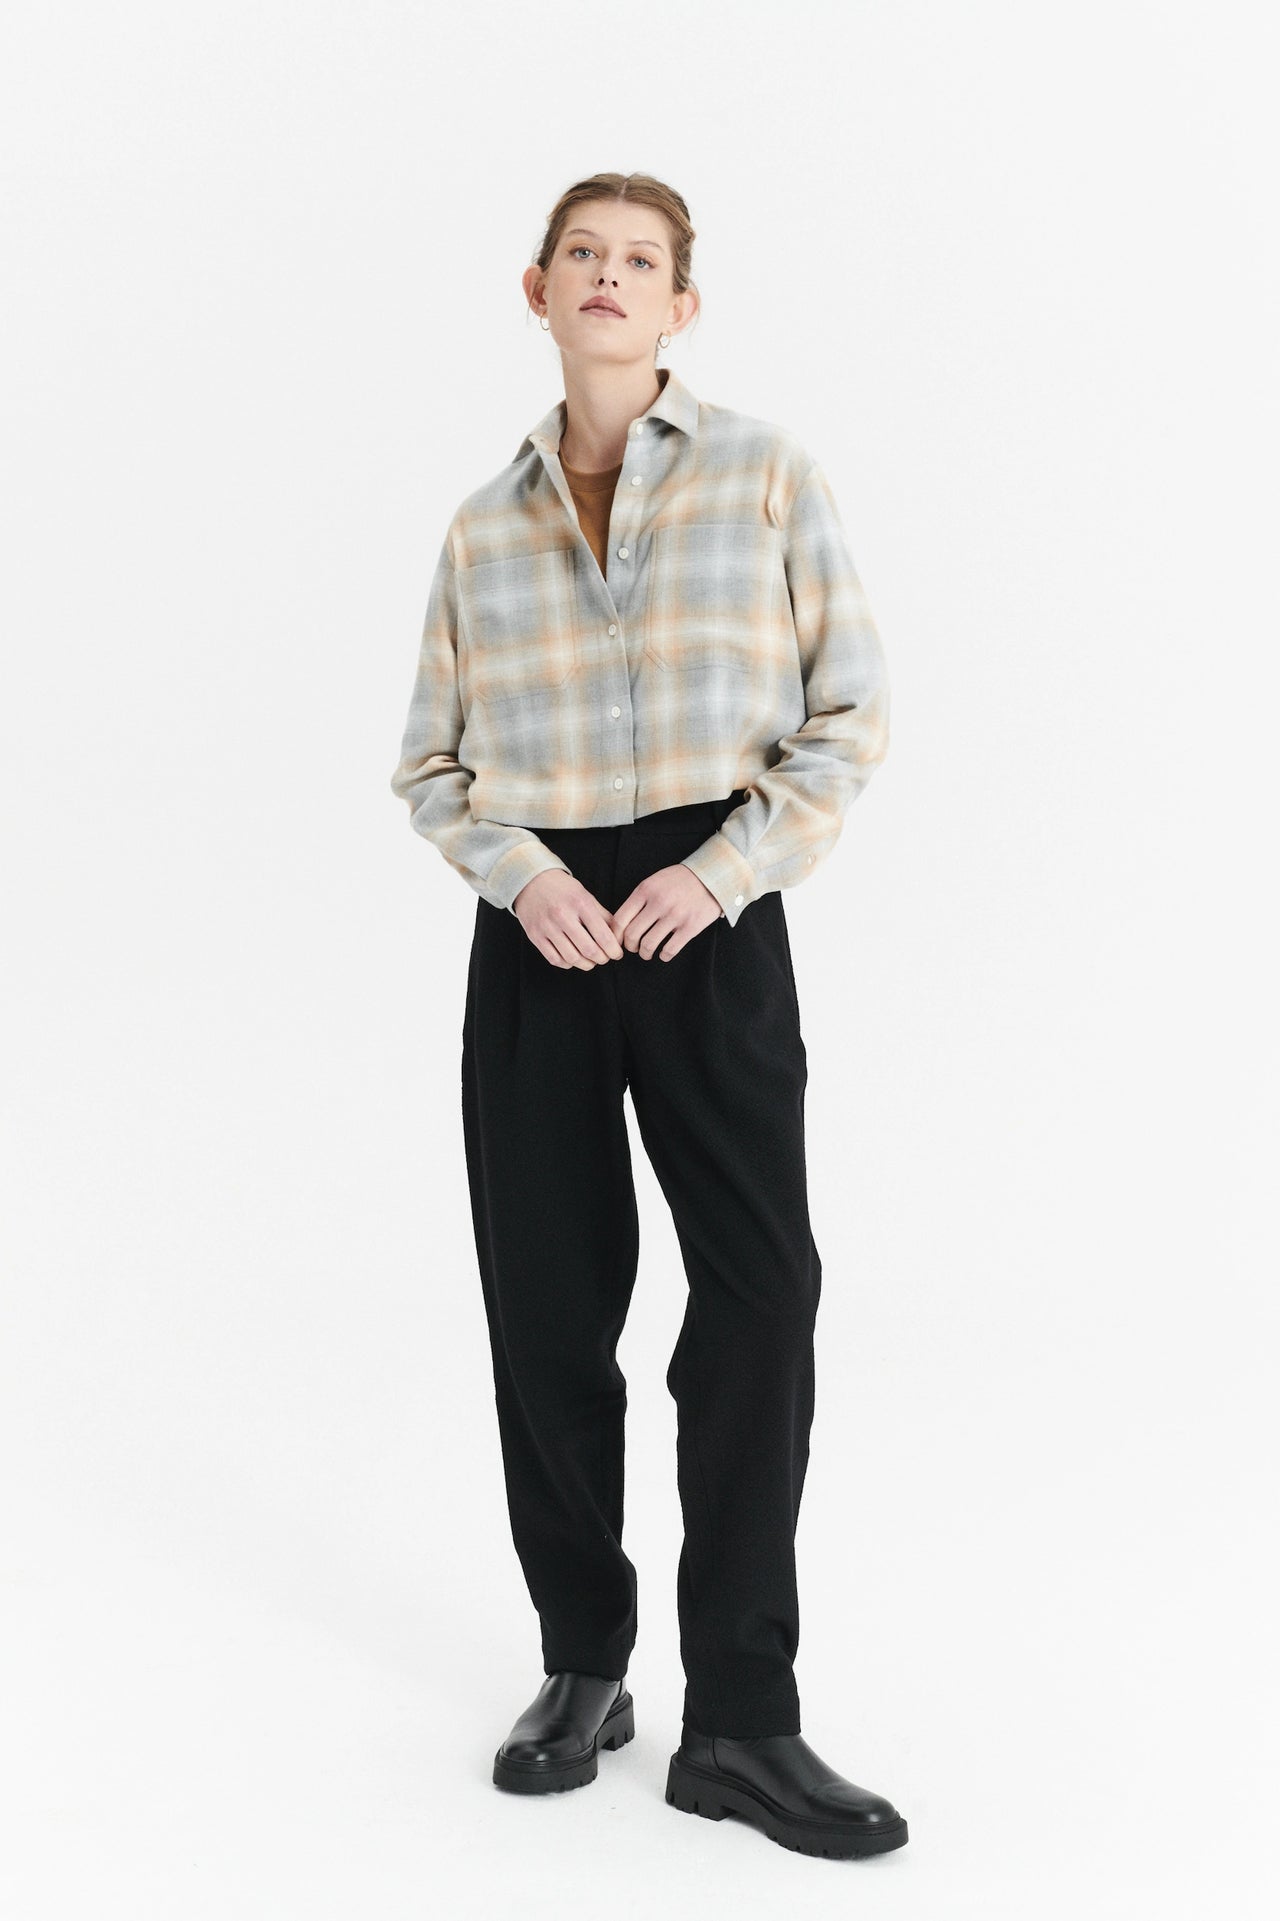 Cropped Shirt in a Soft Tonal Beige and Grey Cheqered Italian Cotton Flannel